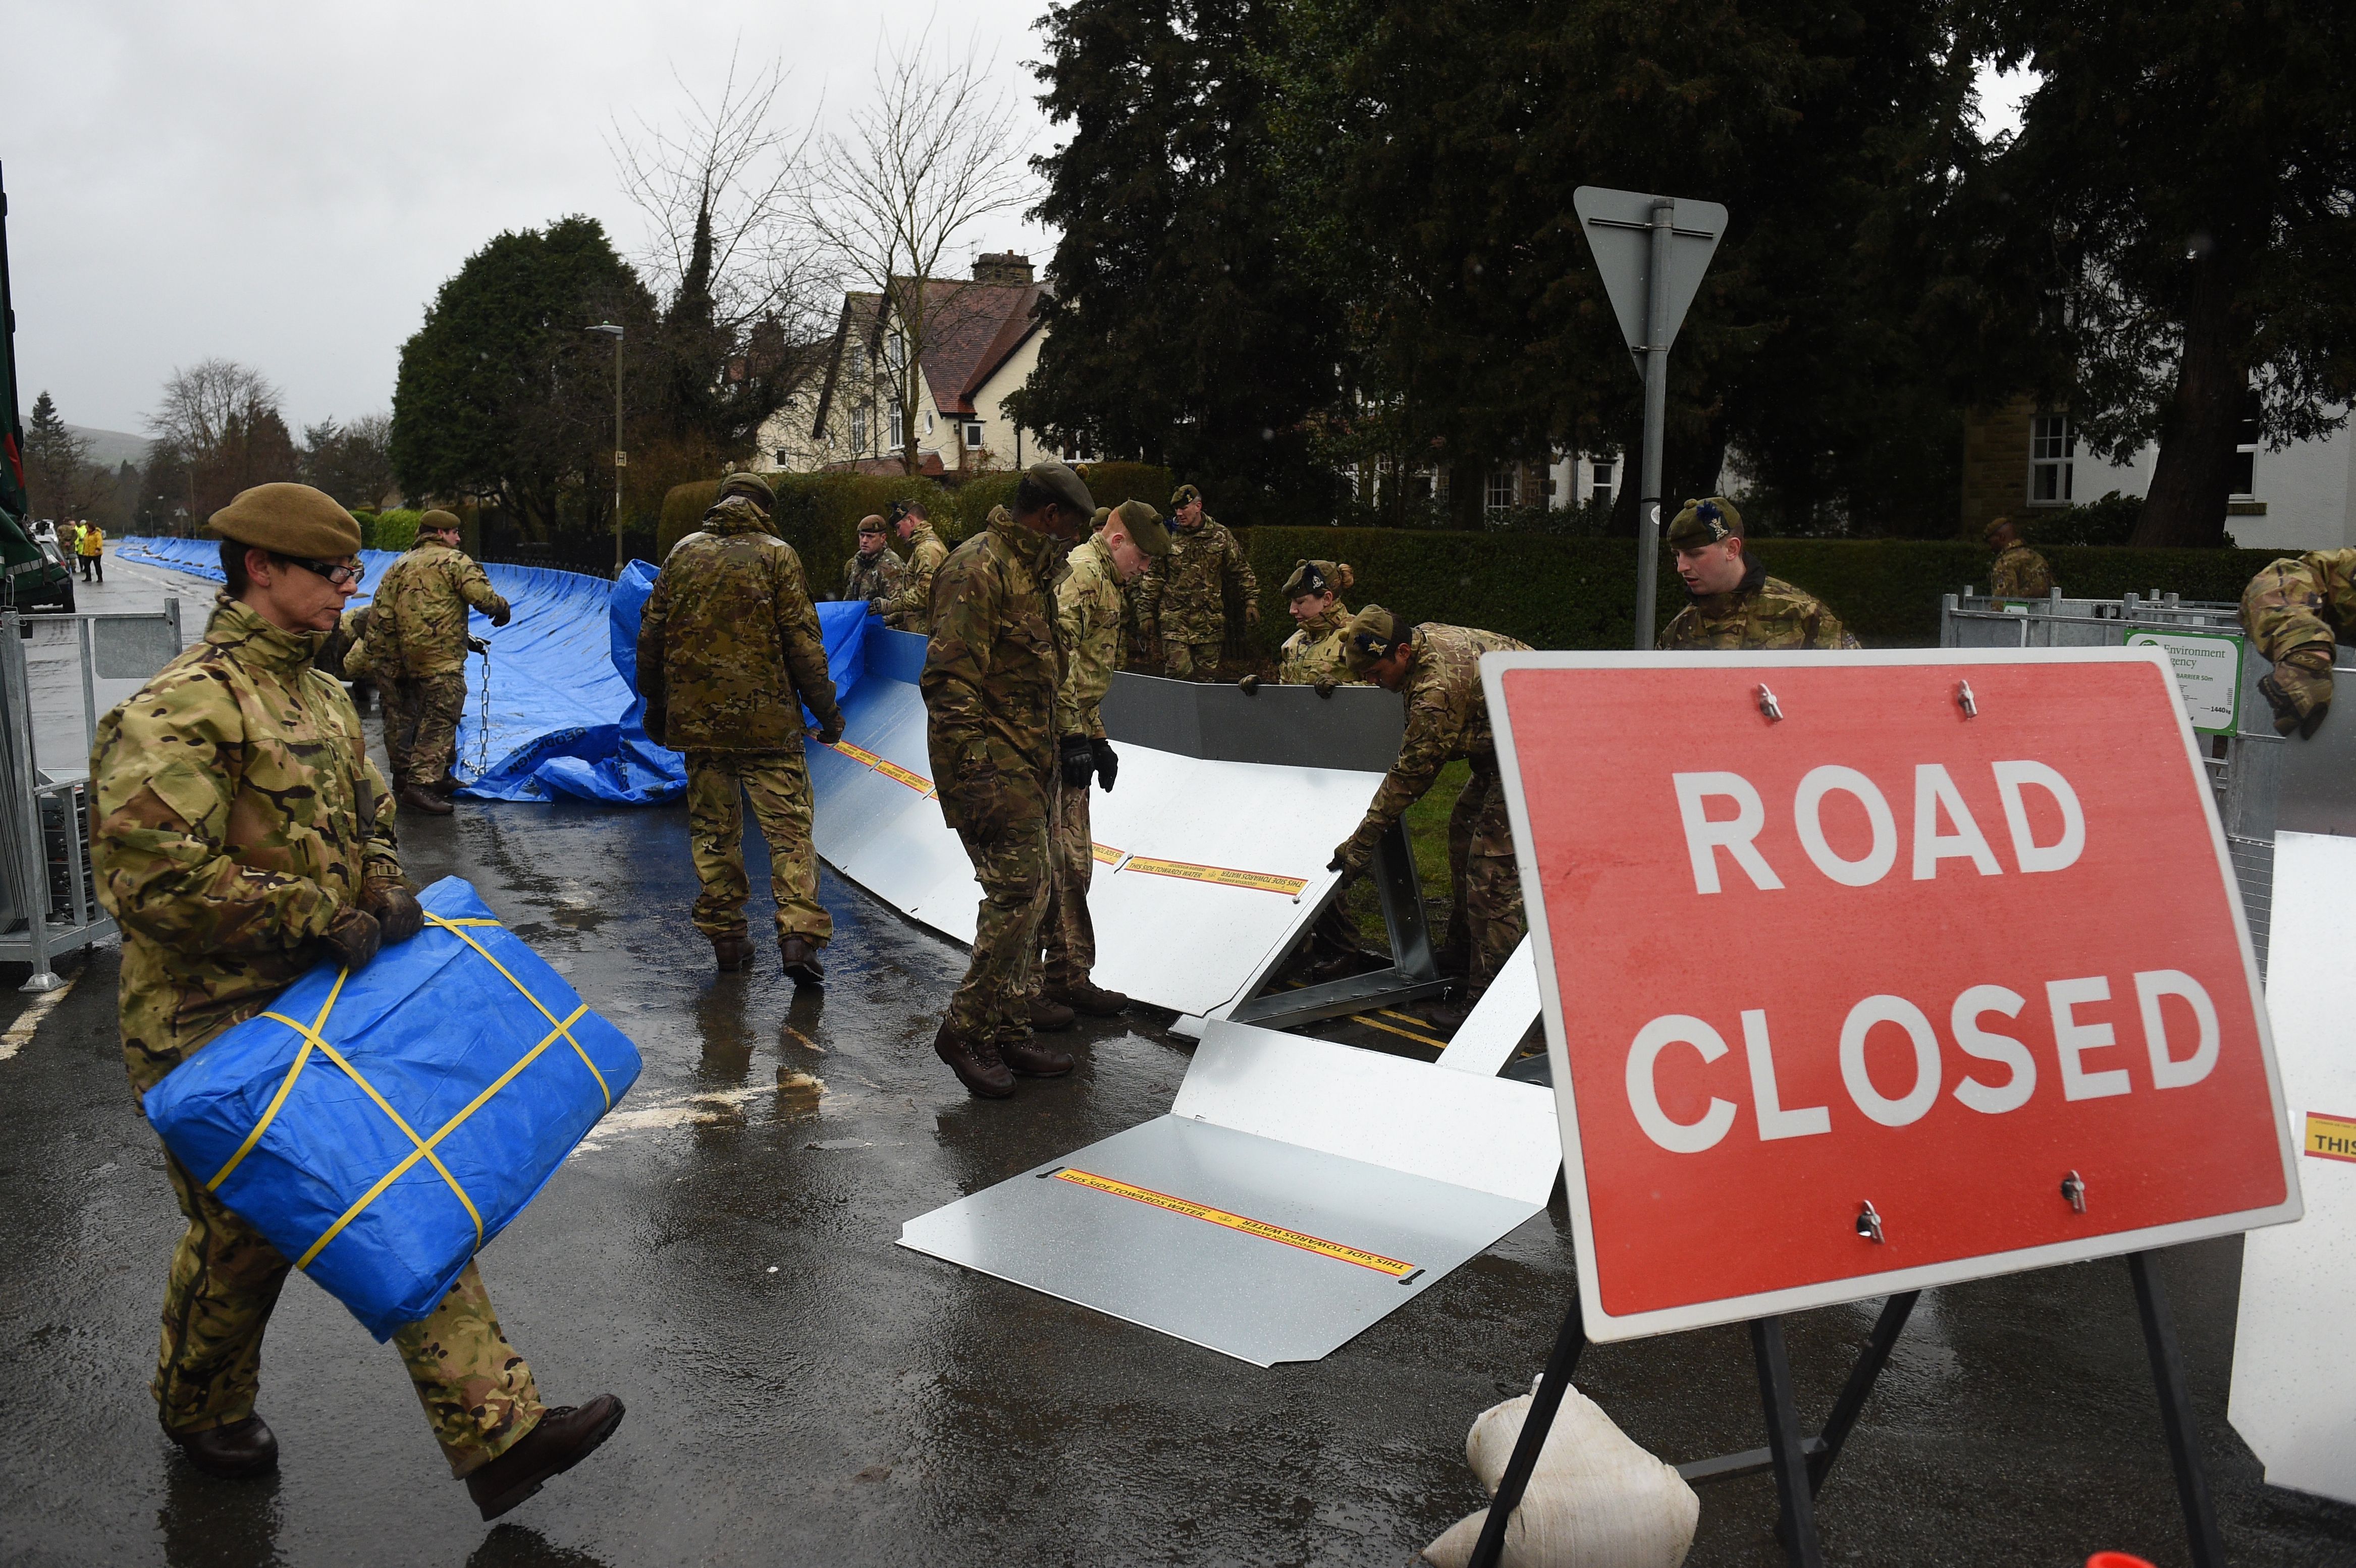 Members of the 4th Battalion Royal Regiment of Scotland erect flood barricades in Ilkley, West Yorkshire on February 15, 2020